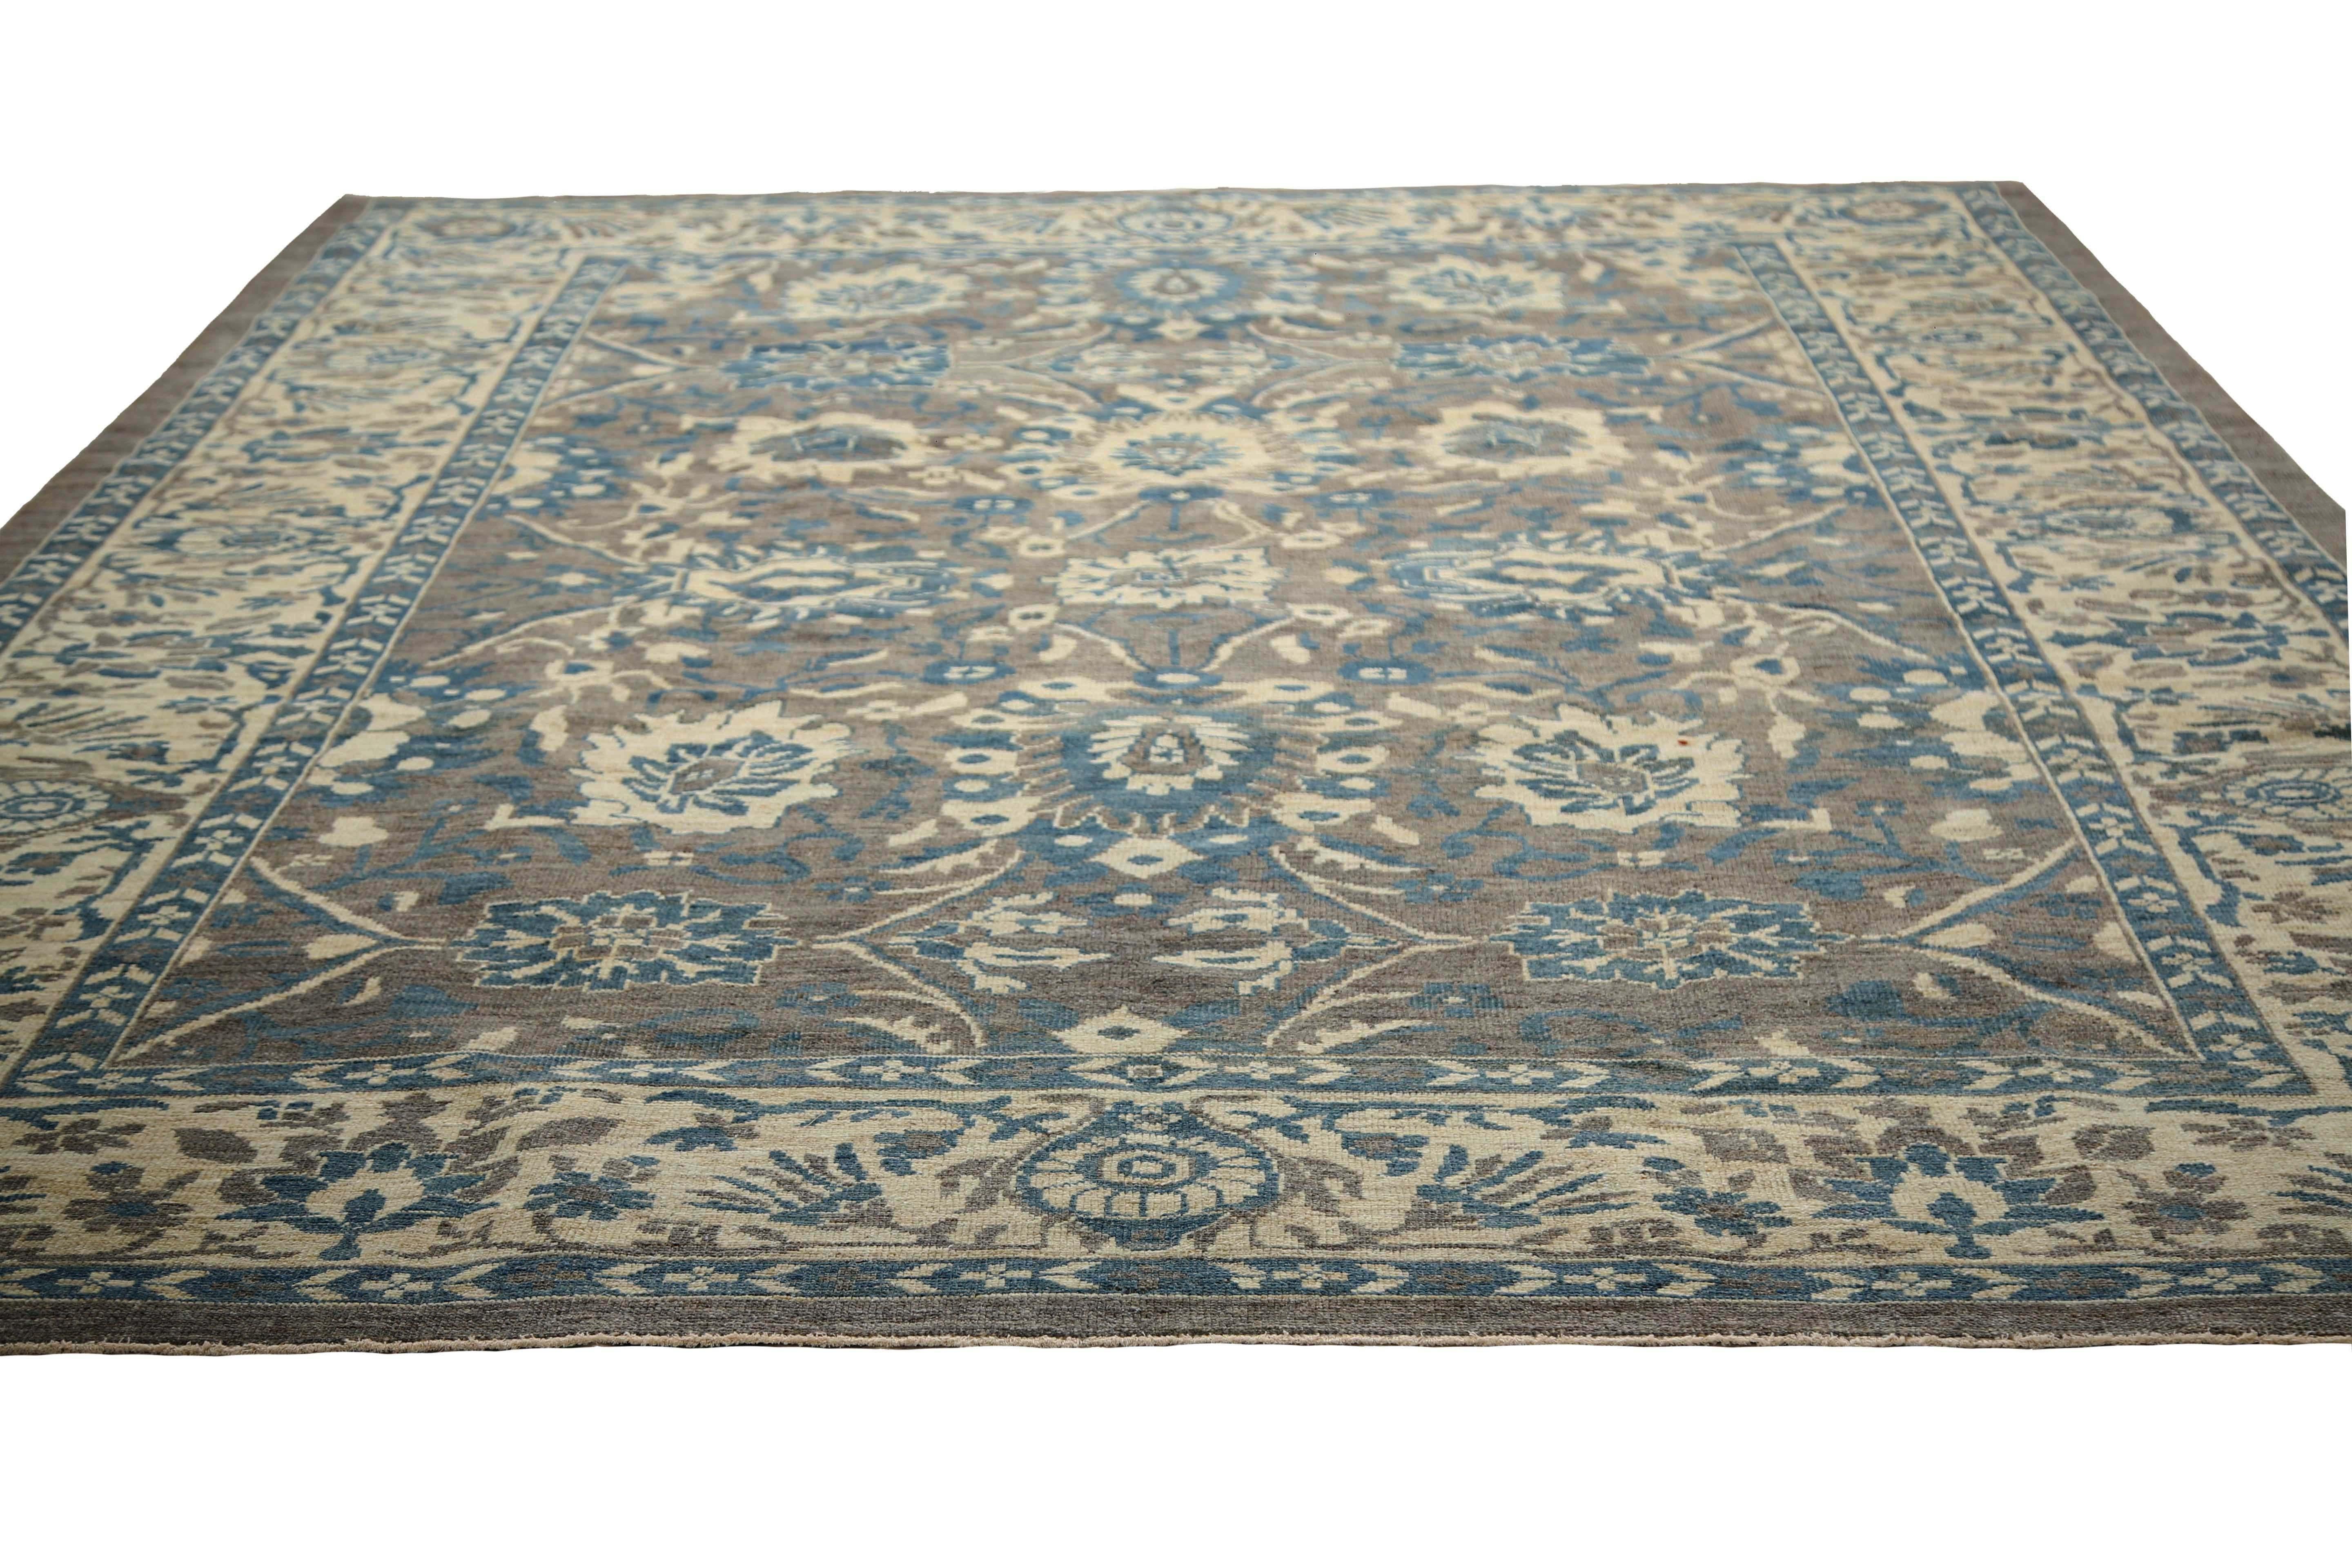 Wool Luxurious Handmade Sultanabad Rug - Traditional Design, Blue, Grey, and Beige To For Sale